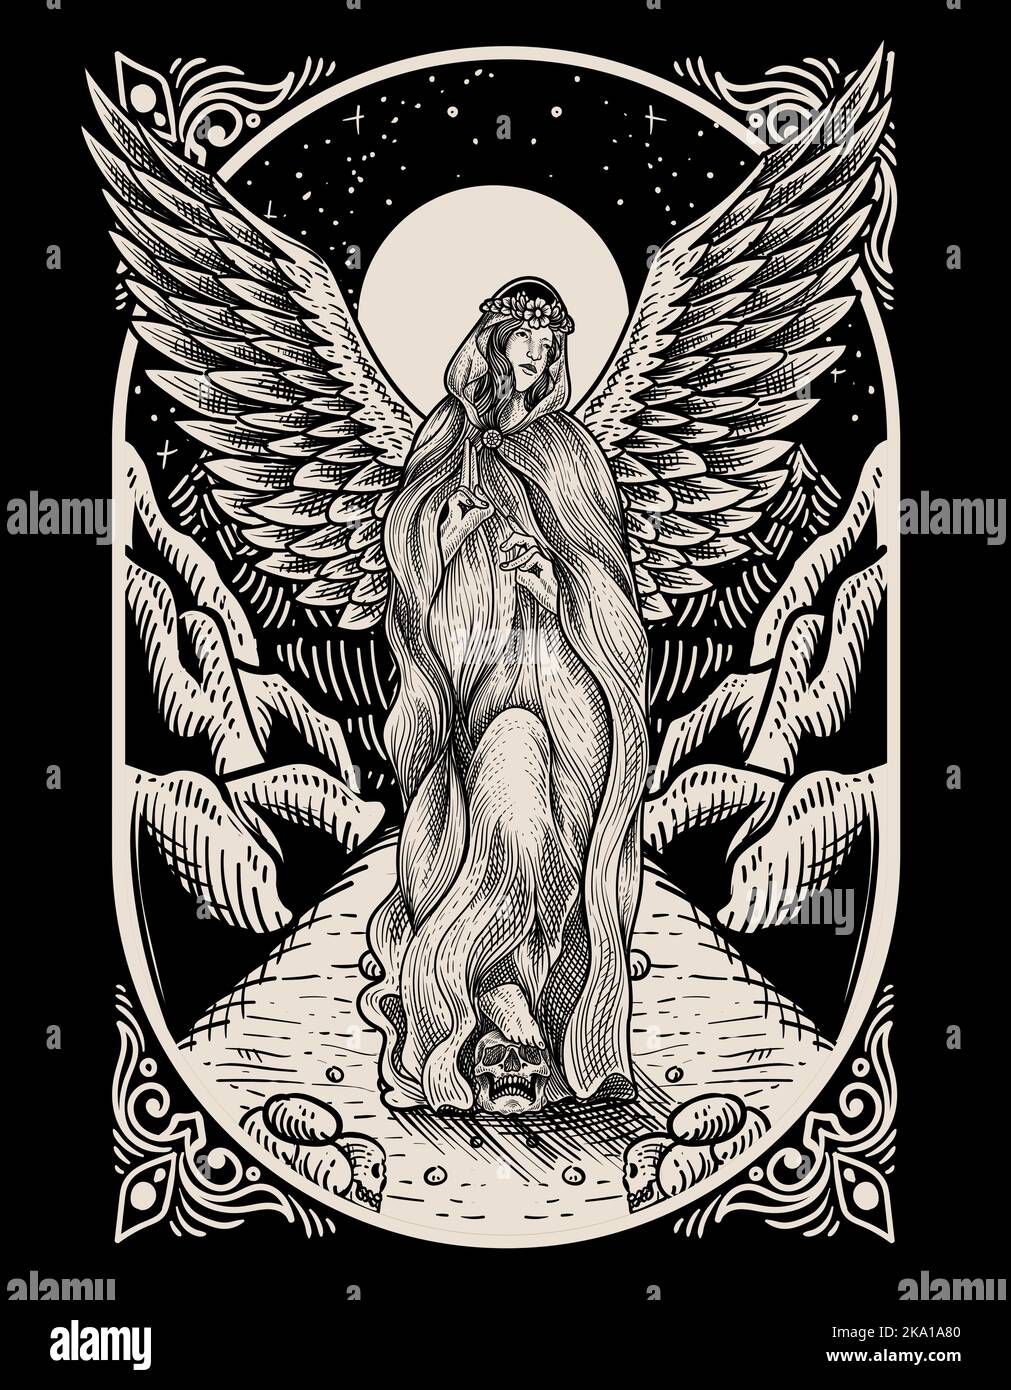 illustration vintage angel with engraving style Stock Vector